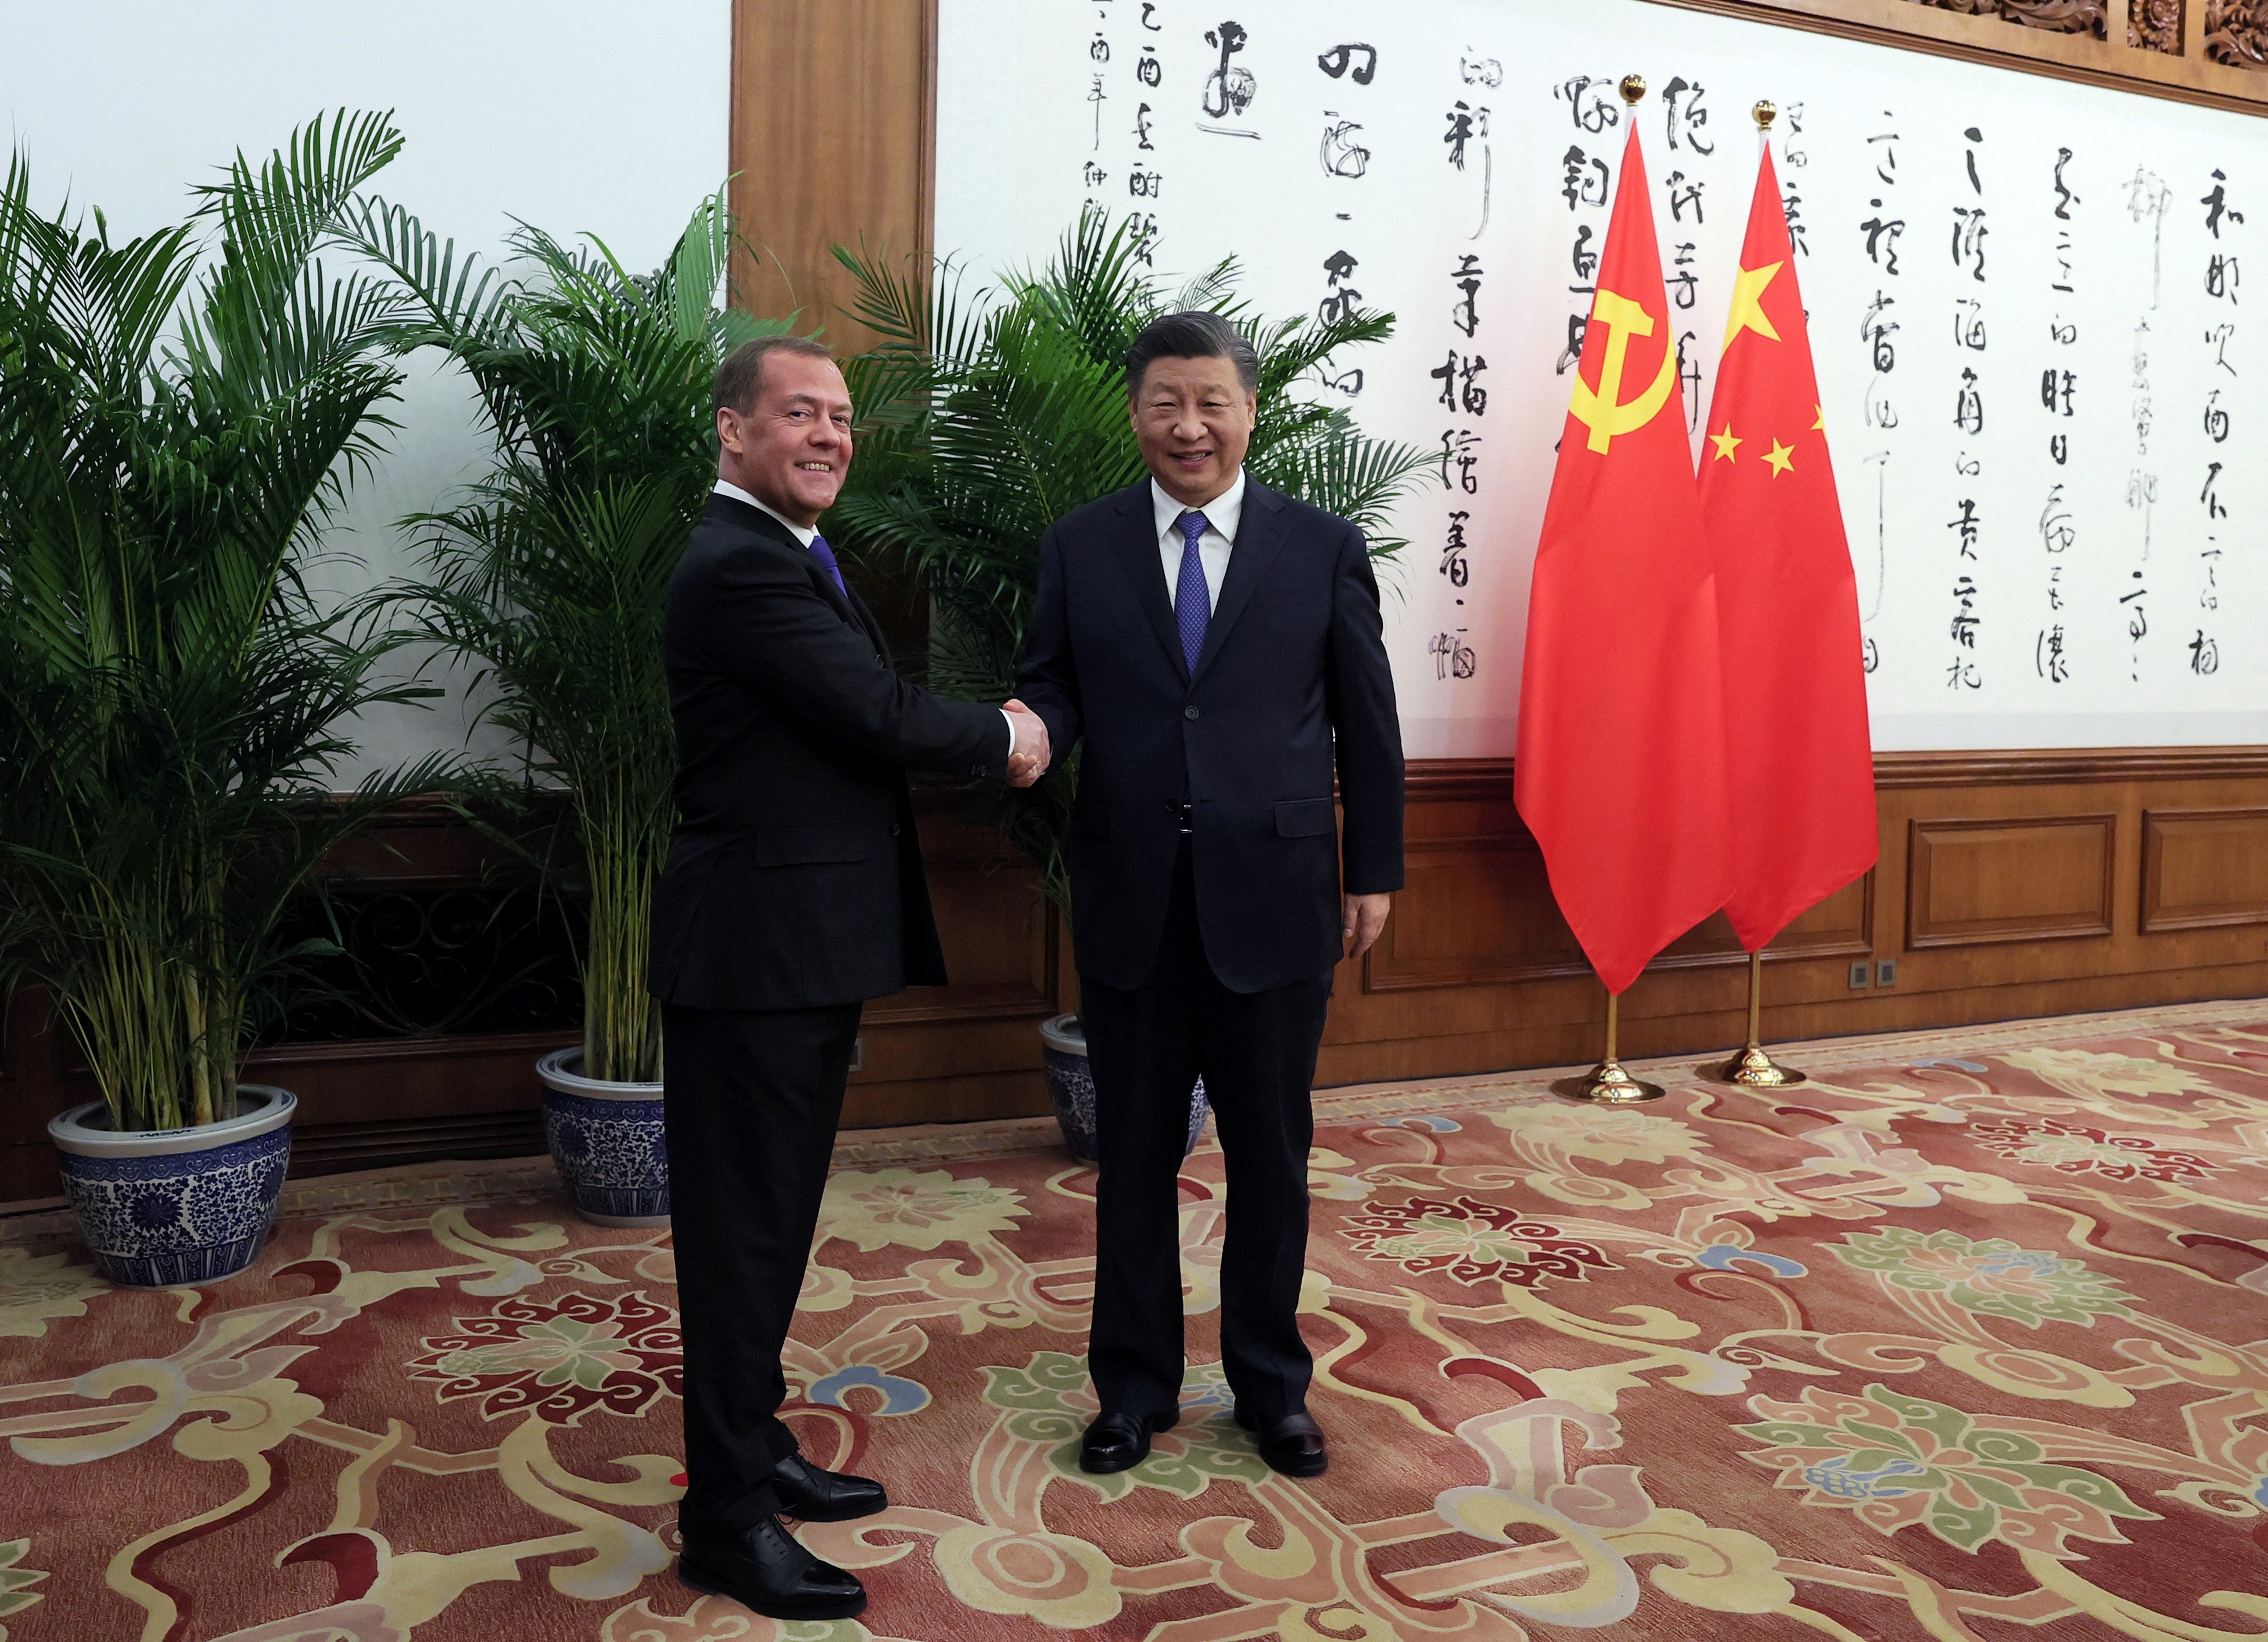 Deputy chairman of Russia's Security Council Medvedev visits China